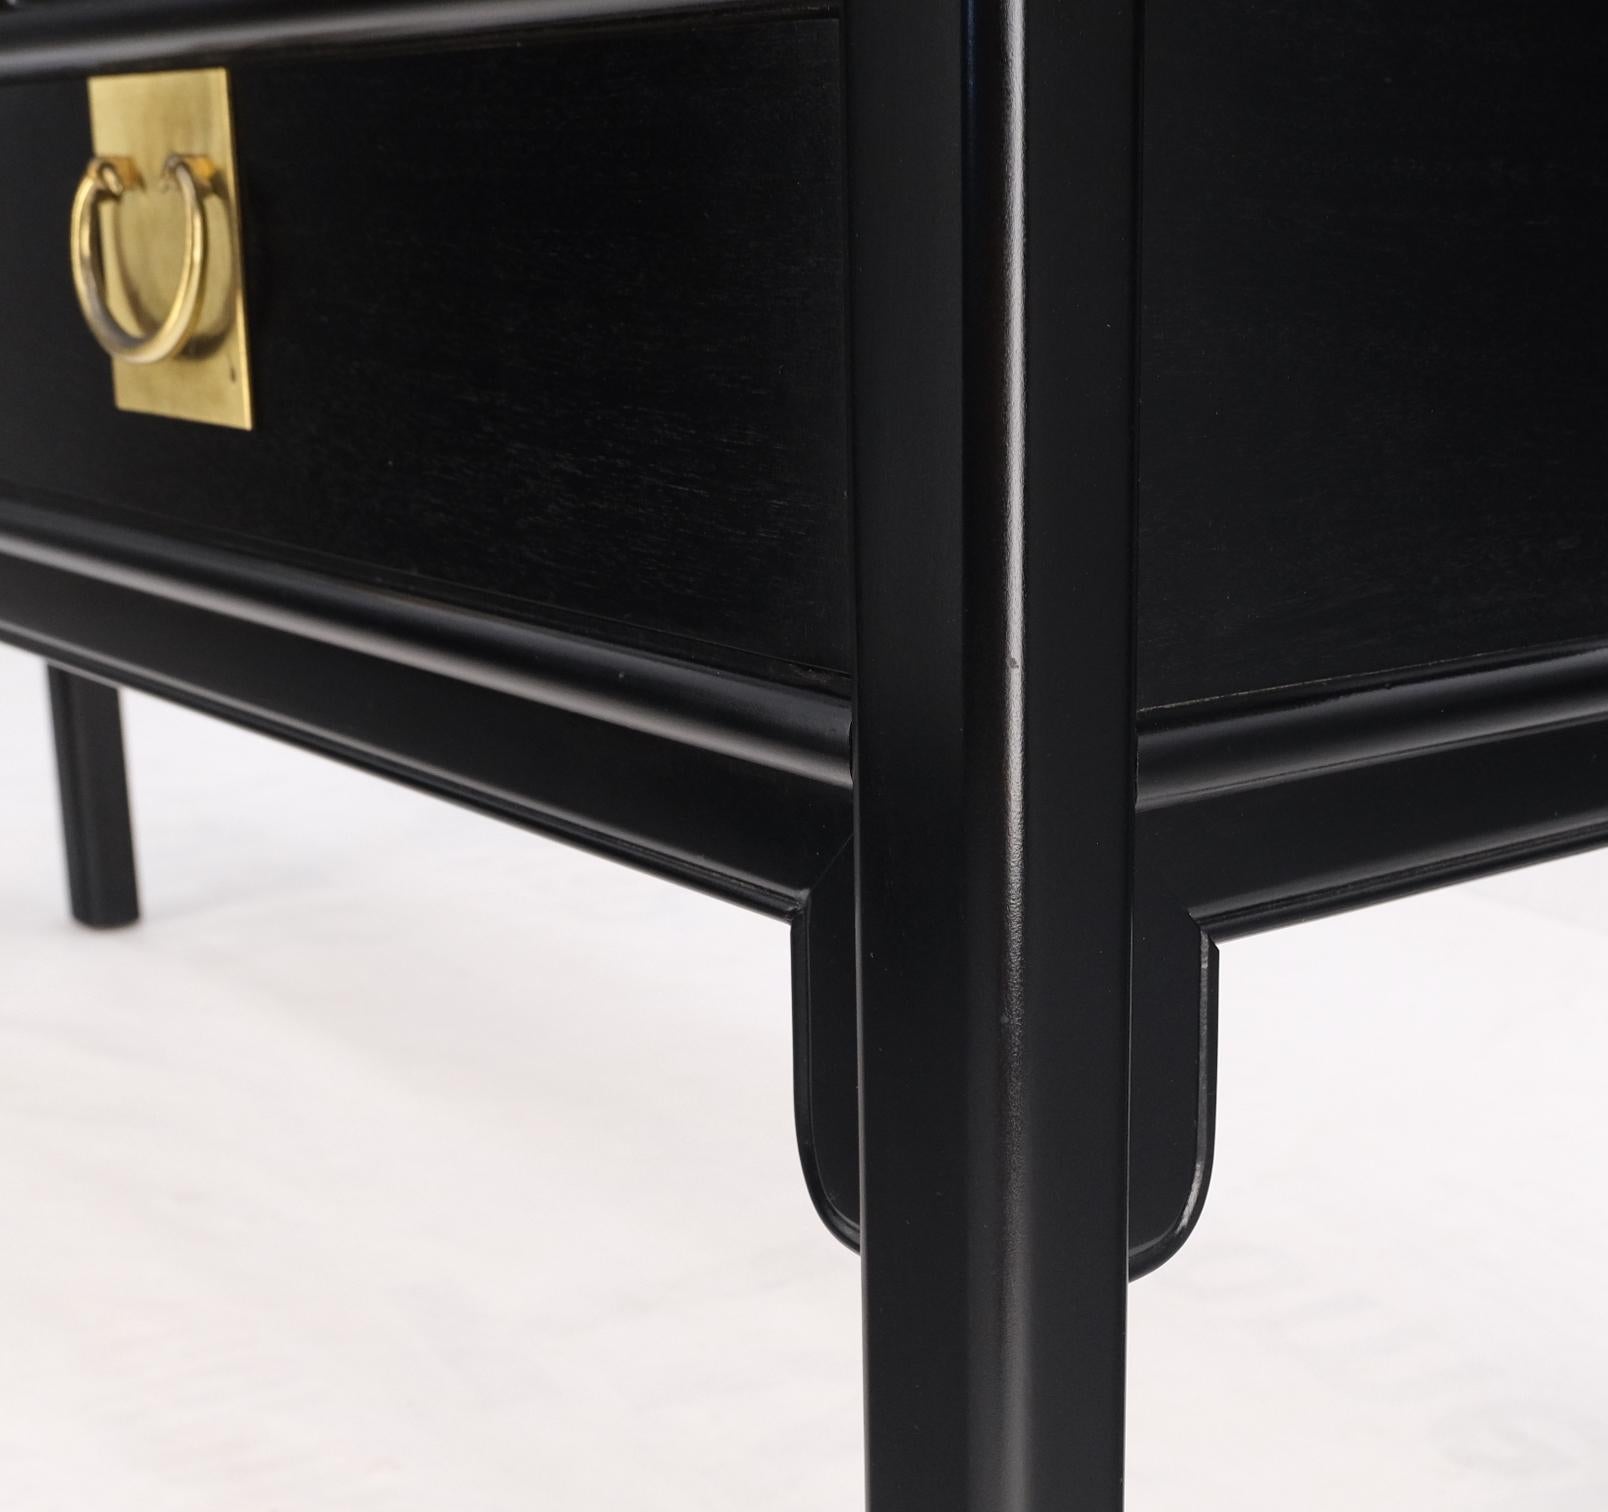 Lacquered Black Lacquer Brass Hardware 5 Drawers Oriental Long Credenza Console Table Mint